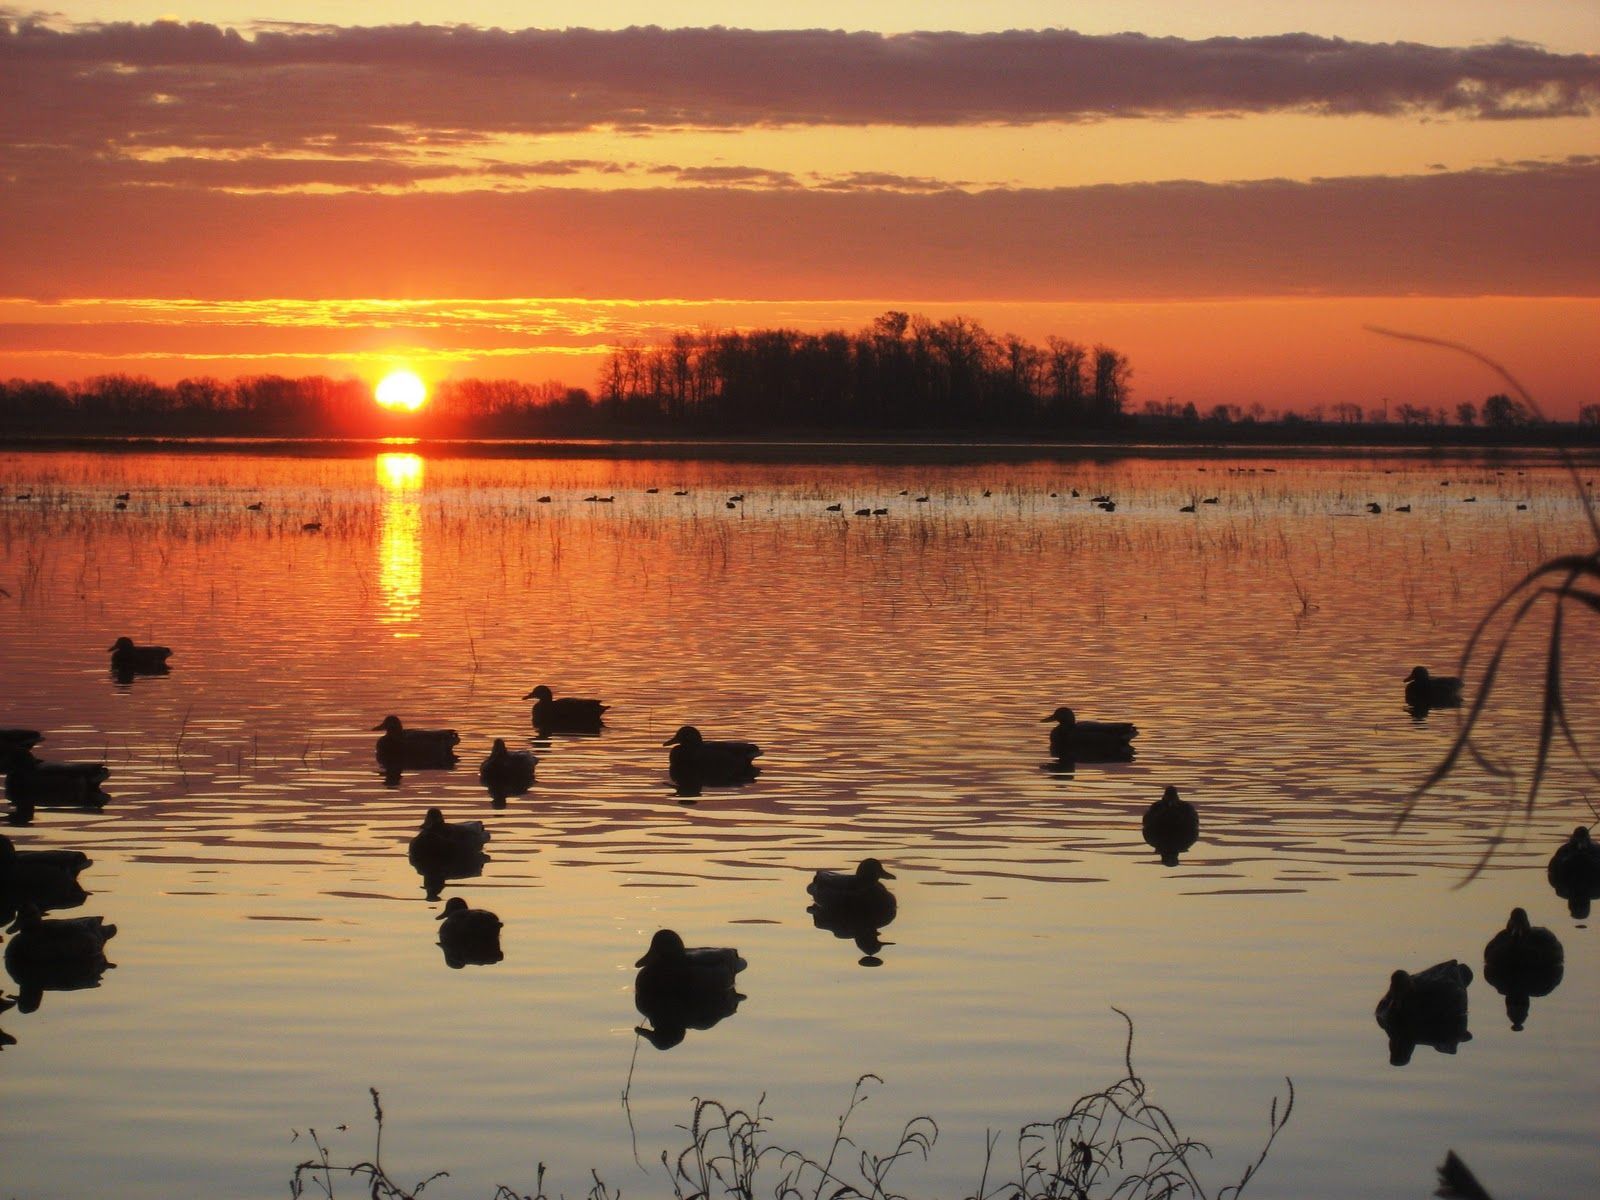 Ducks Unlimited Wallpapers